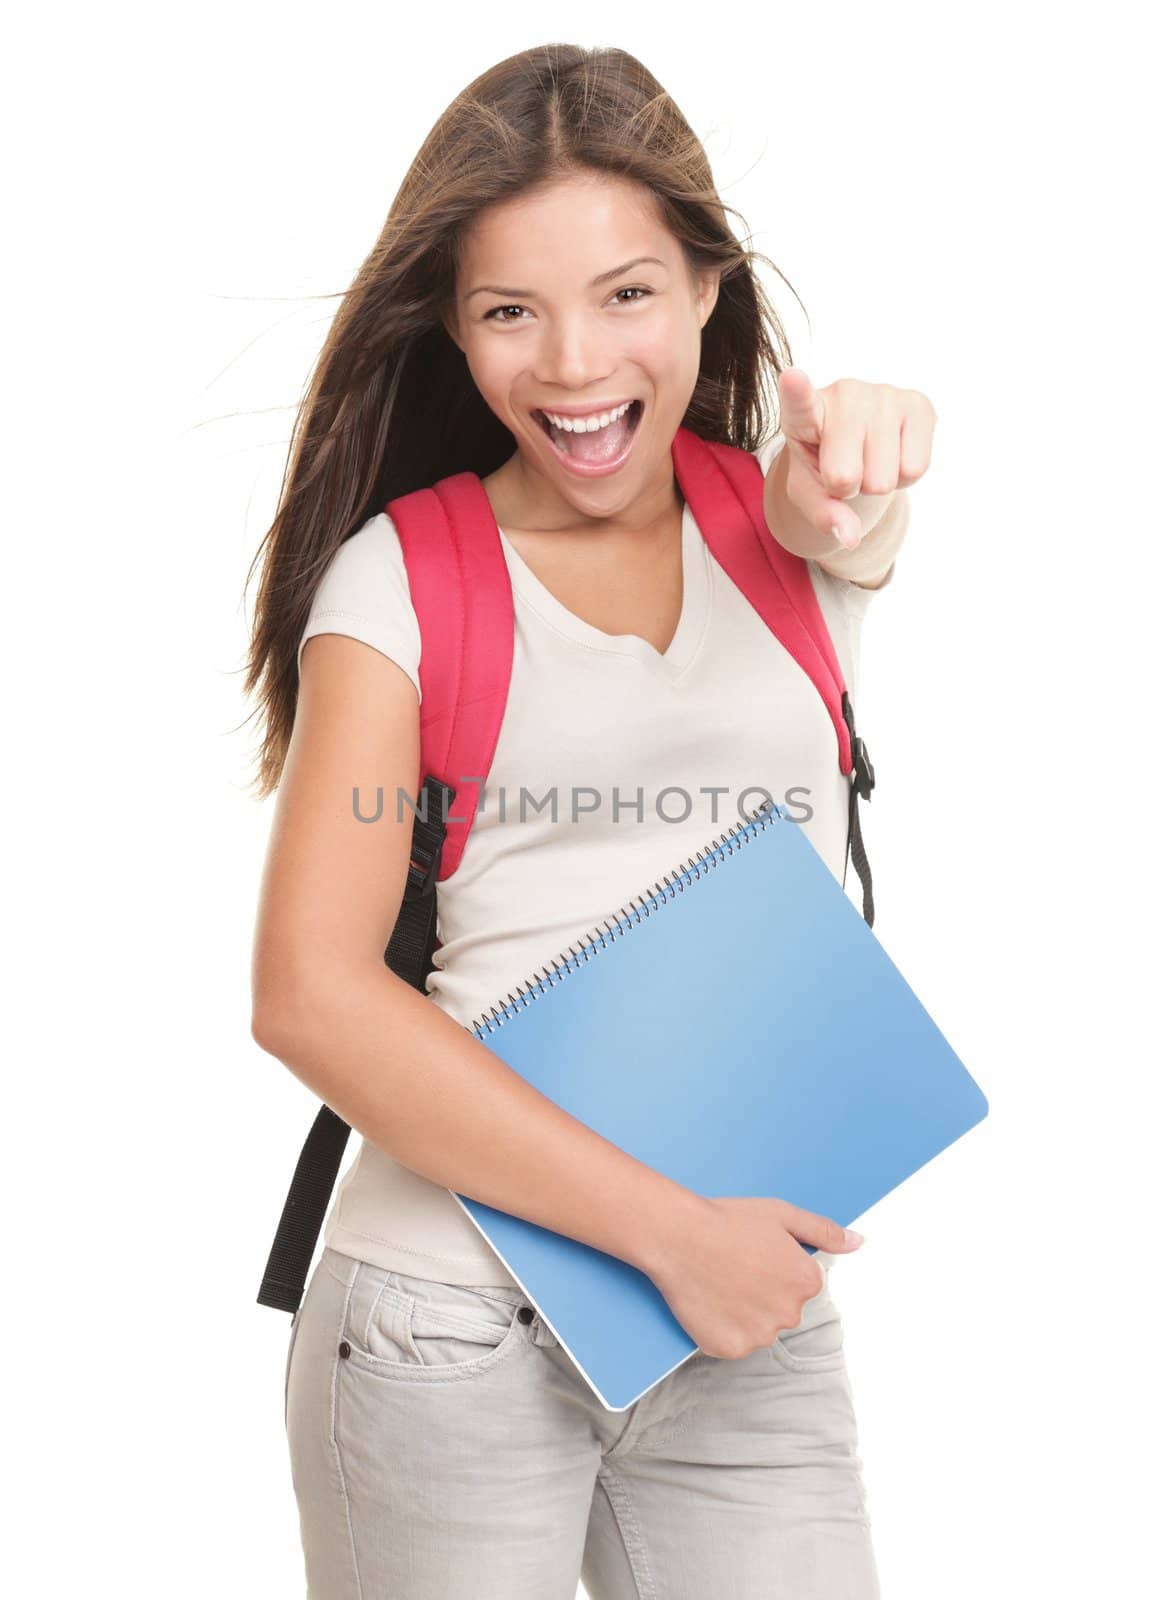 Woman college student pointing at camera cheerful and excited. Isolated on white background.